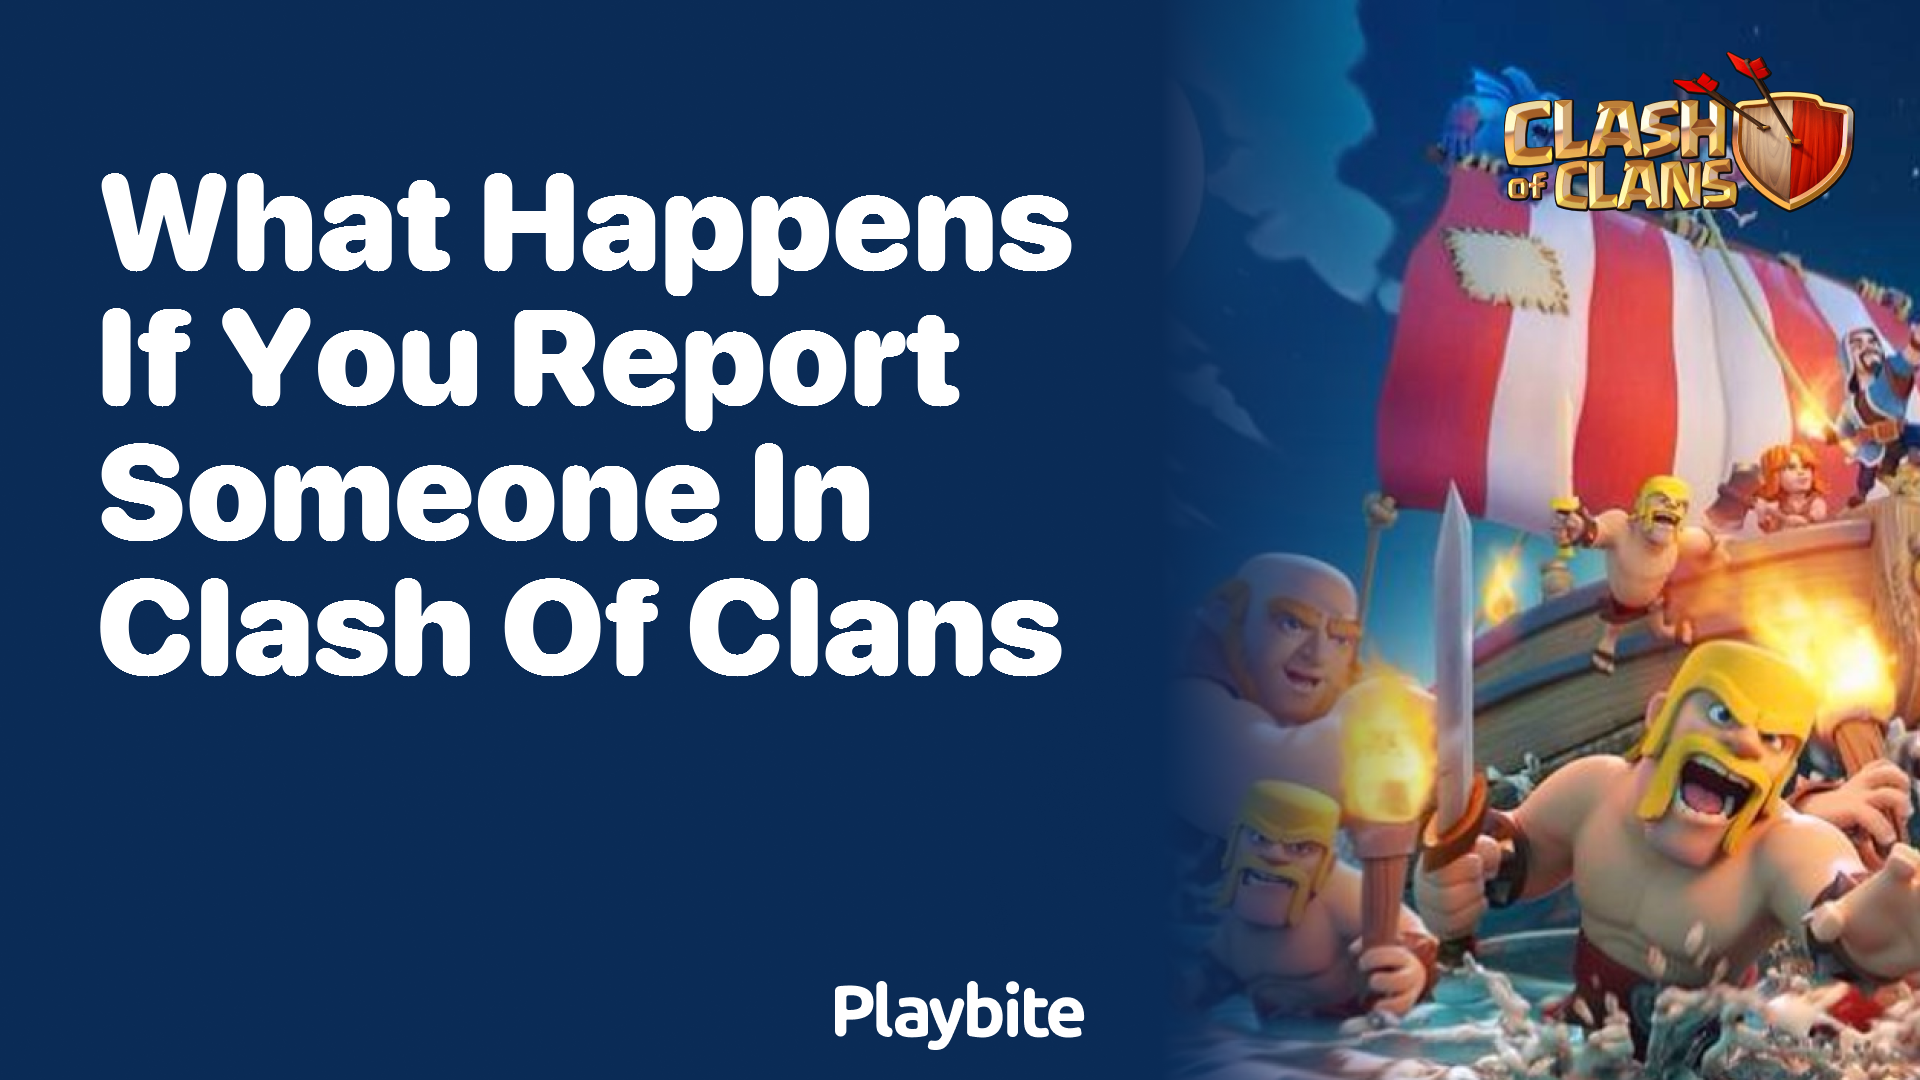 What Happens if You Report Someone in Clash of Clans?